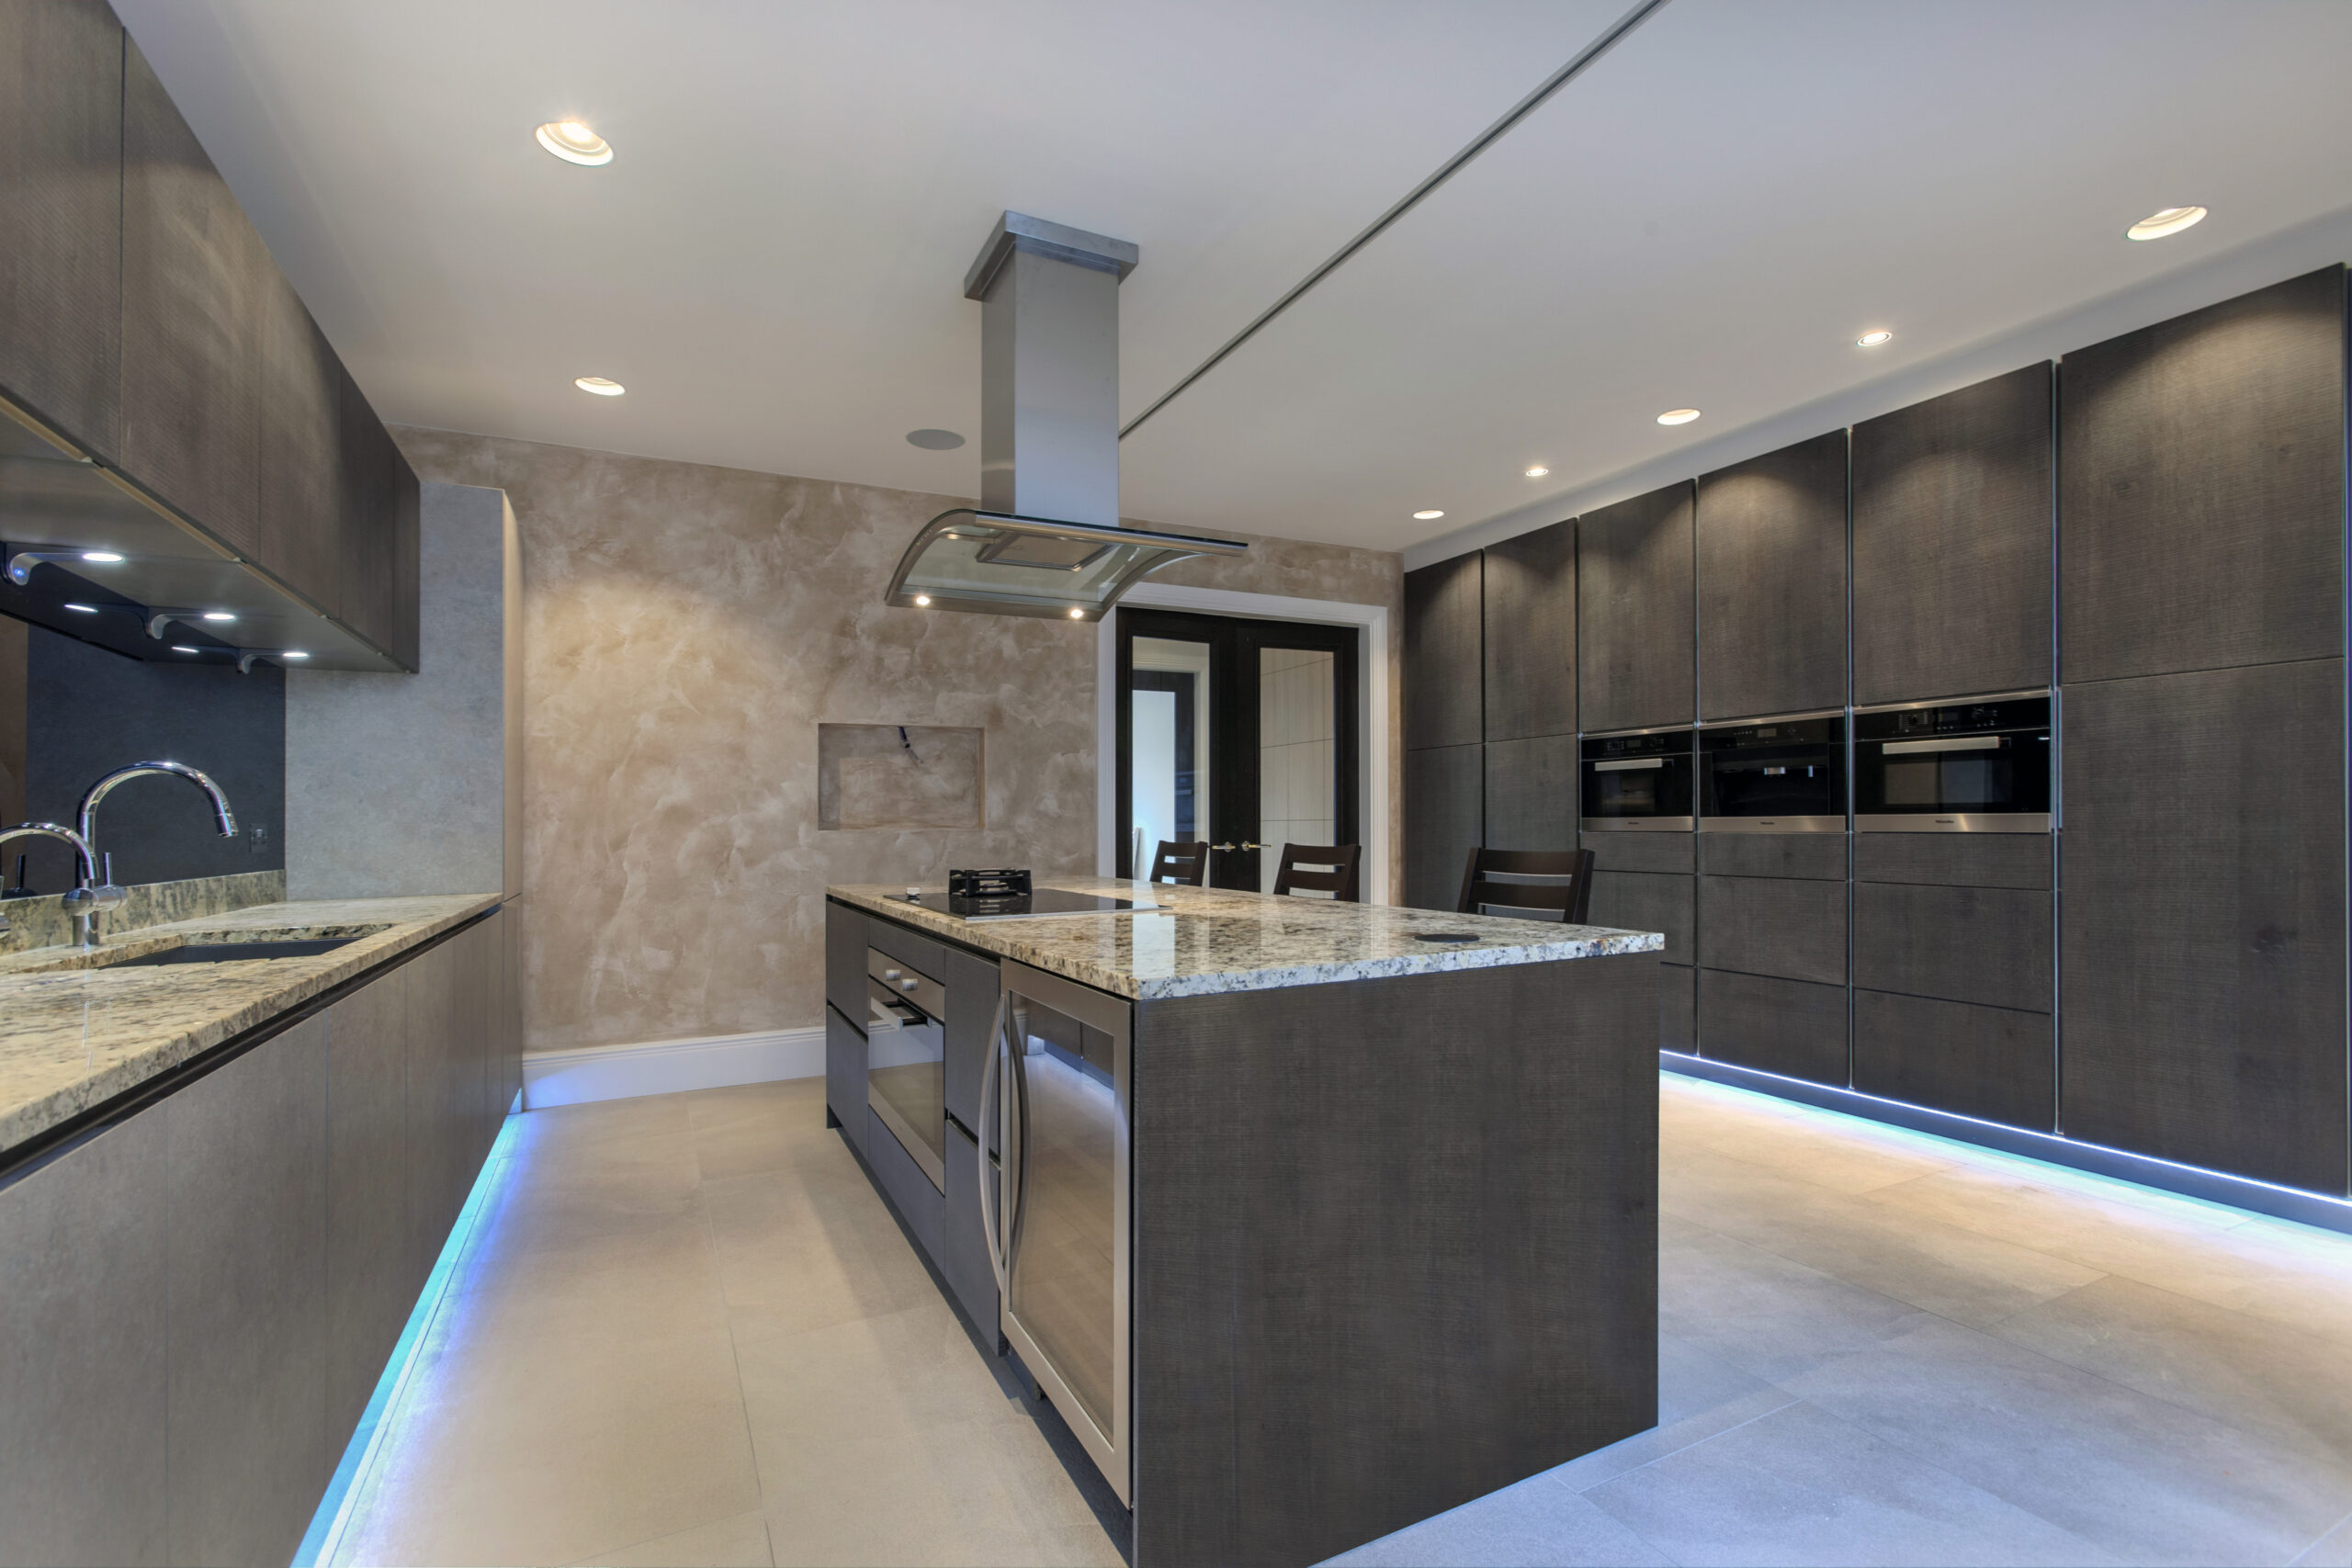 A Dark Themed Kitchen With an Island